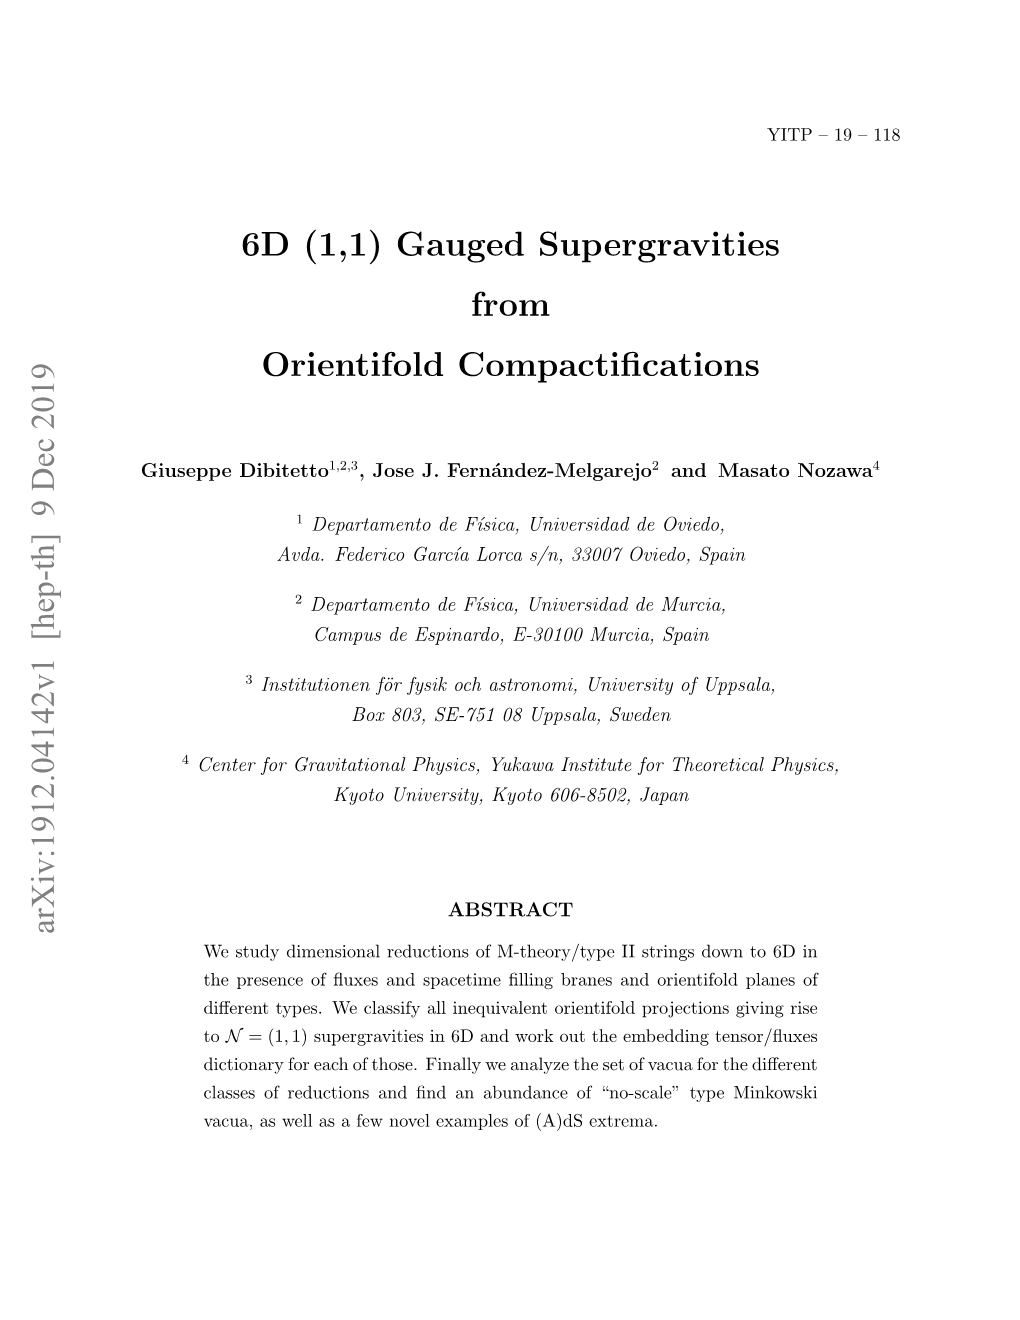 6D (1,1) Gauged Supergravities from Orientifold Compactifications Arxiv